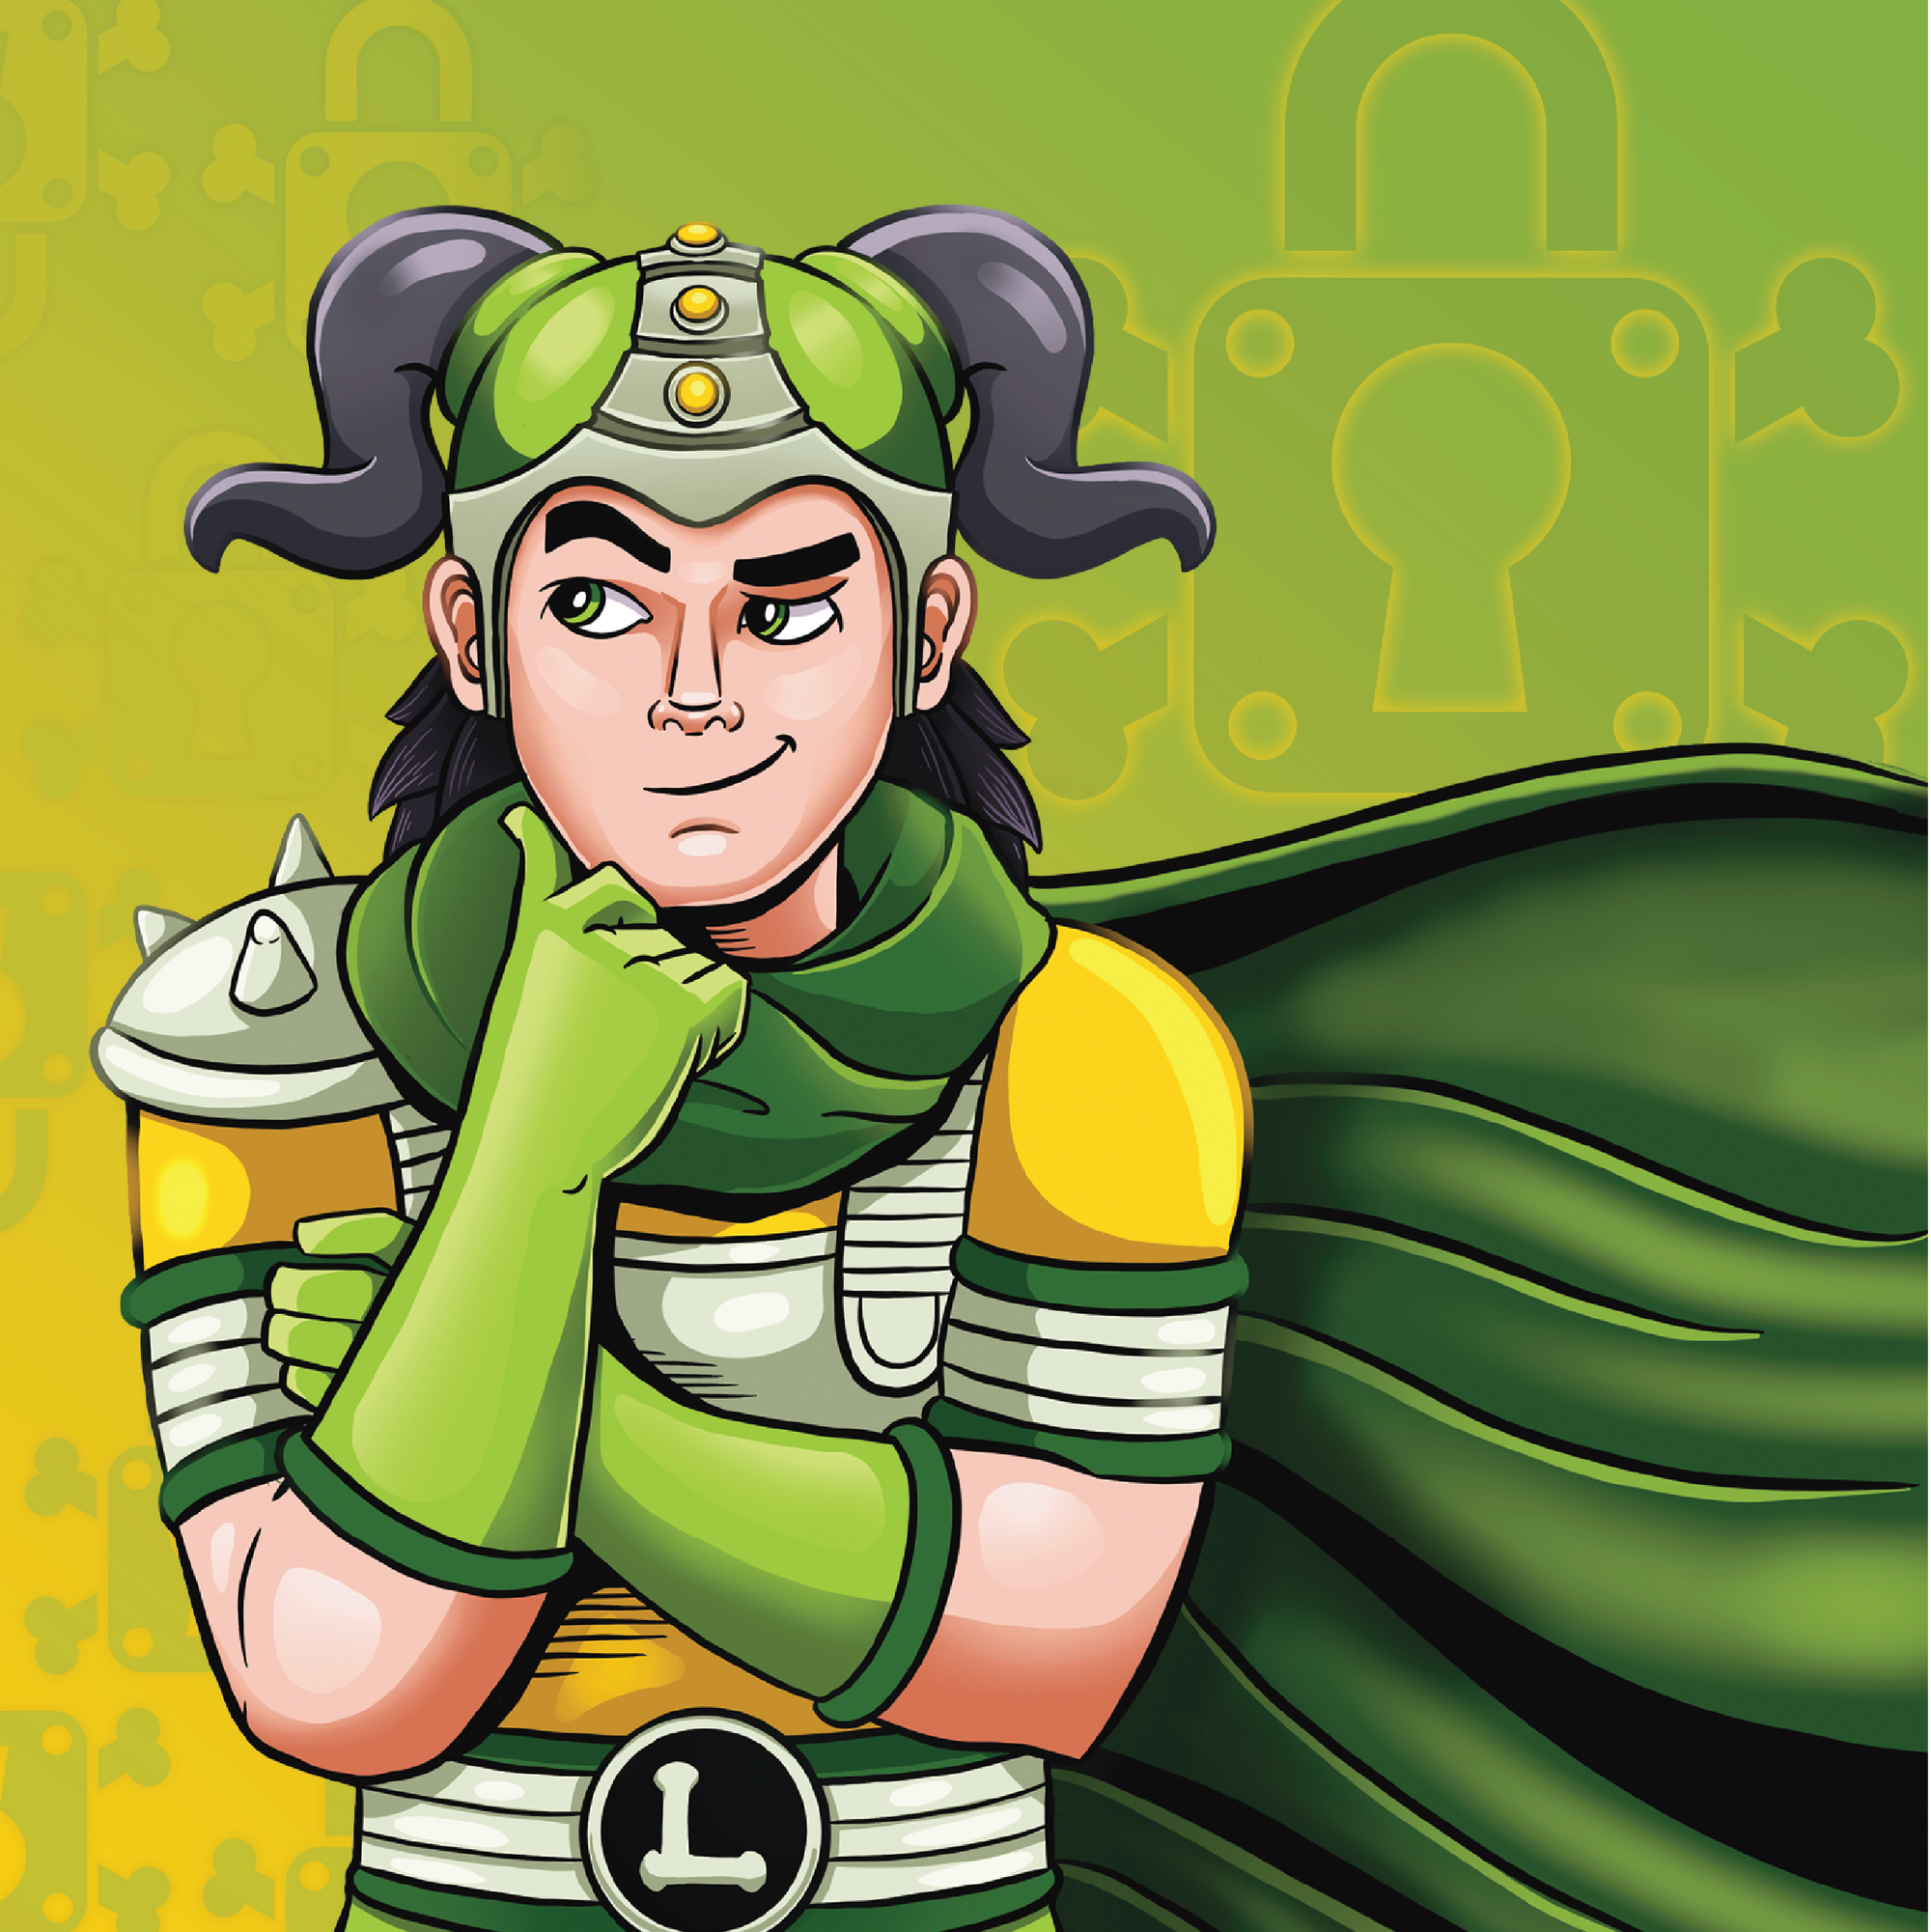 Comic style drawing of Norse folk lore character, Loki, action figure with horned lemon lime helmet and a manic grin